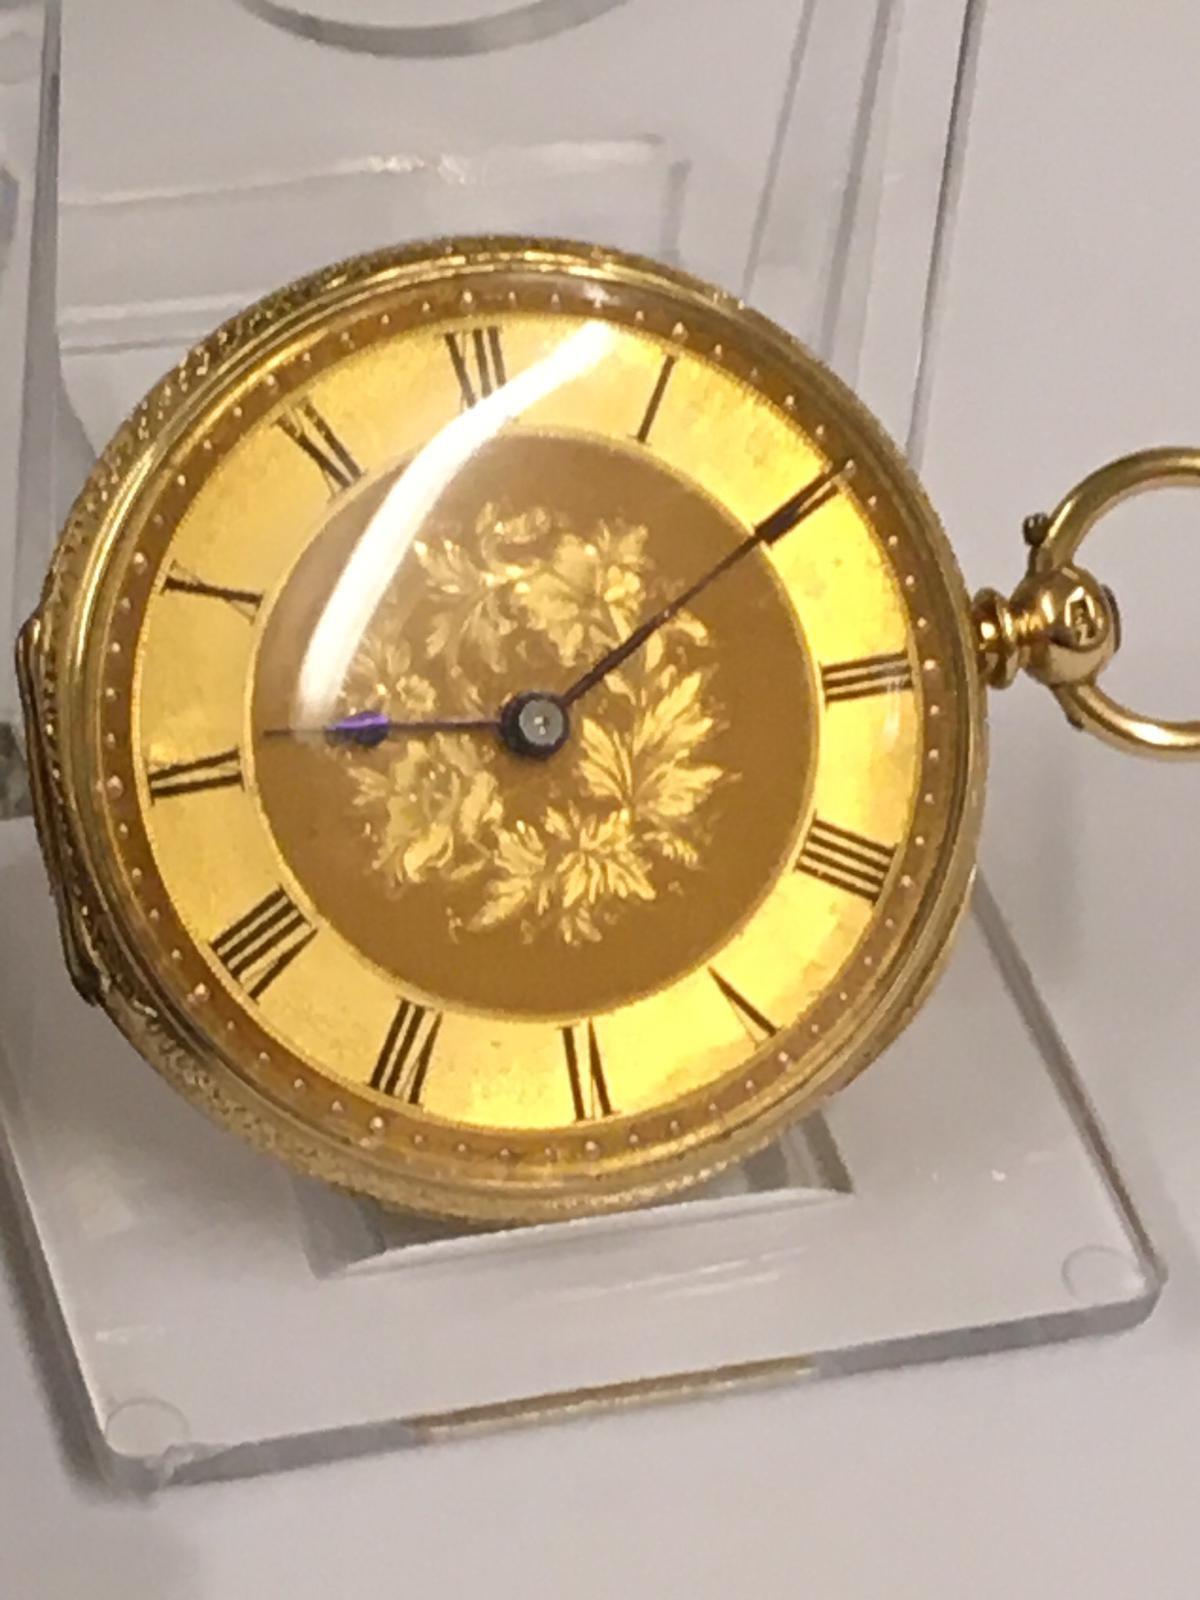 Antique 18k solid gold Pocket watch with key and box, 38mm diameter - Image 5 of 8